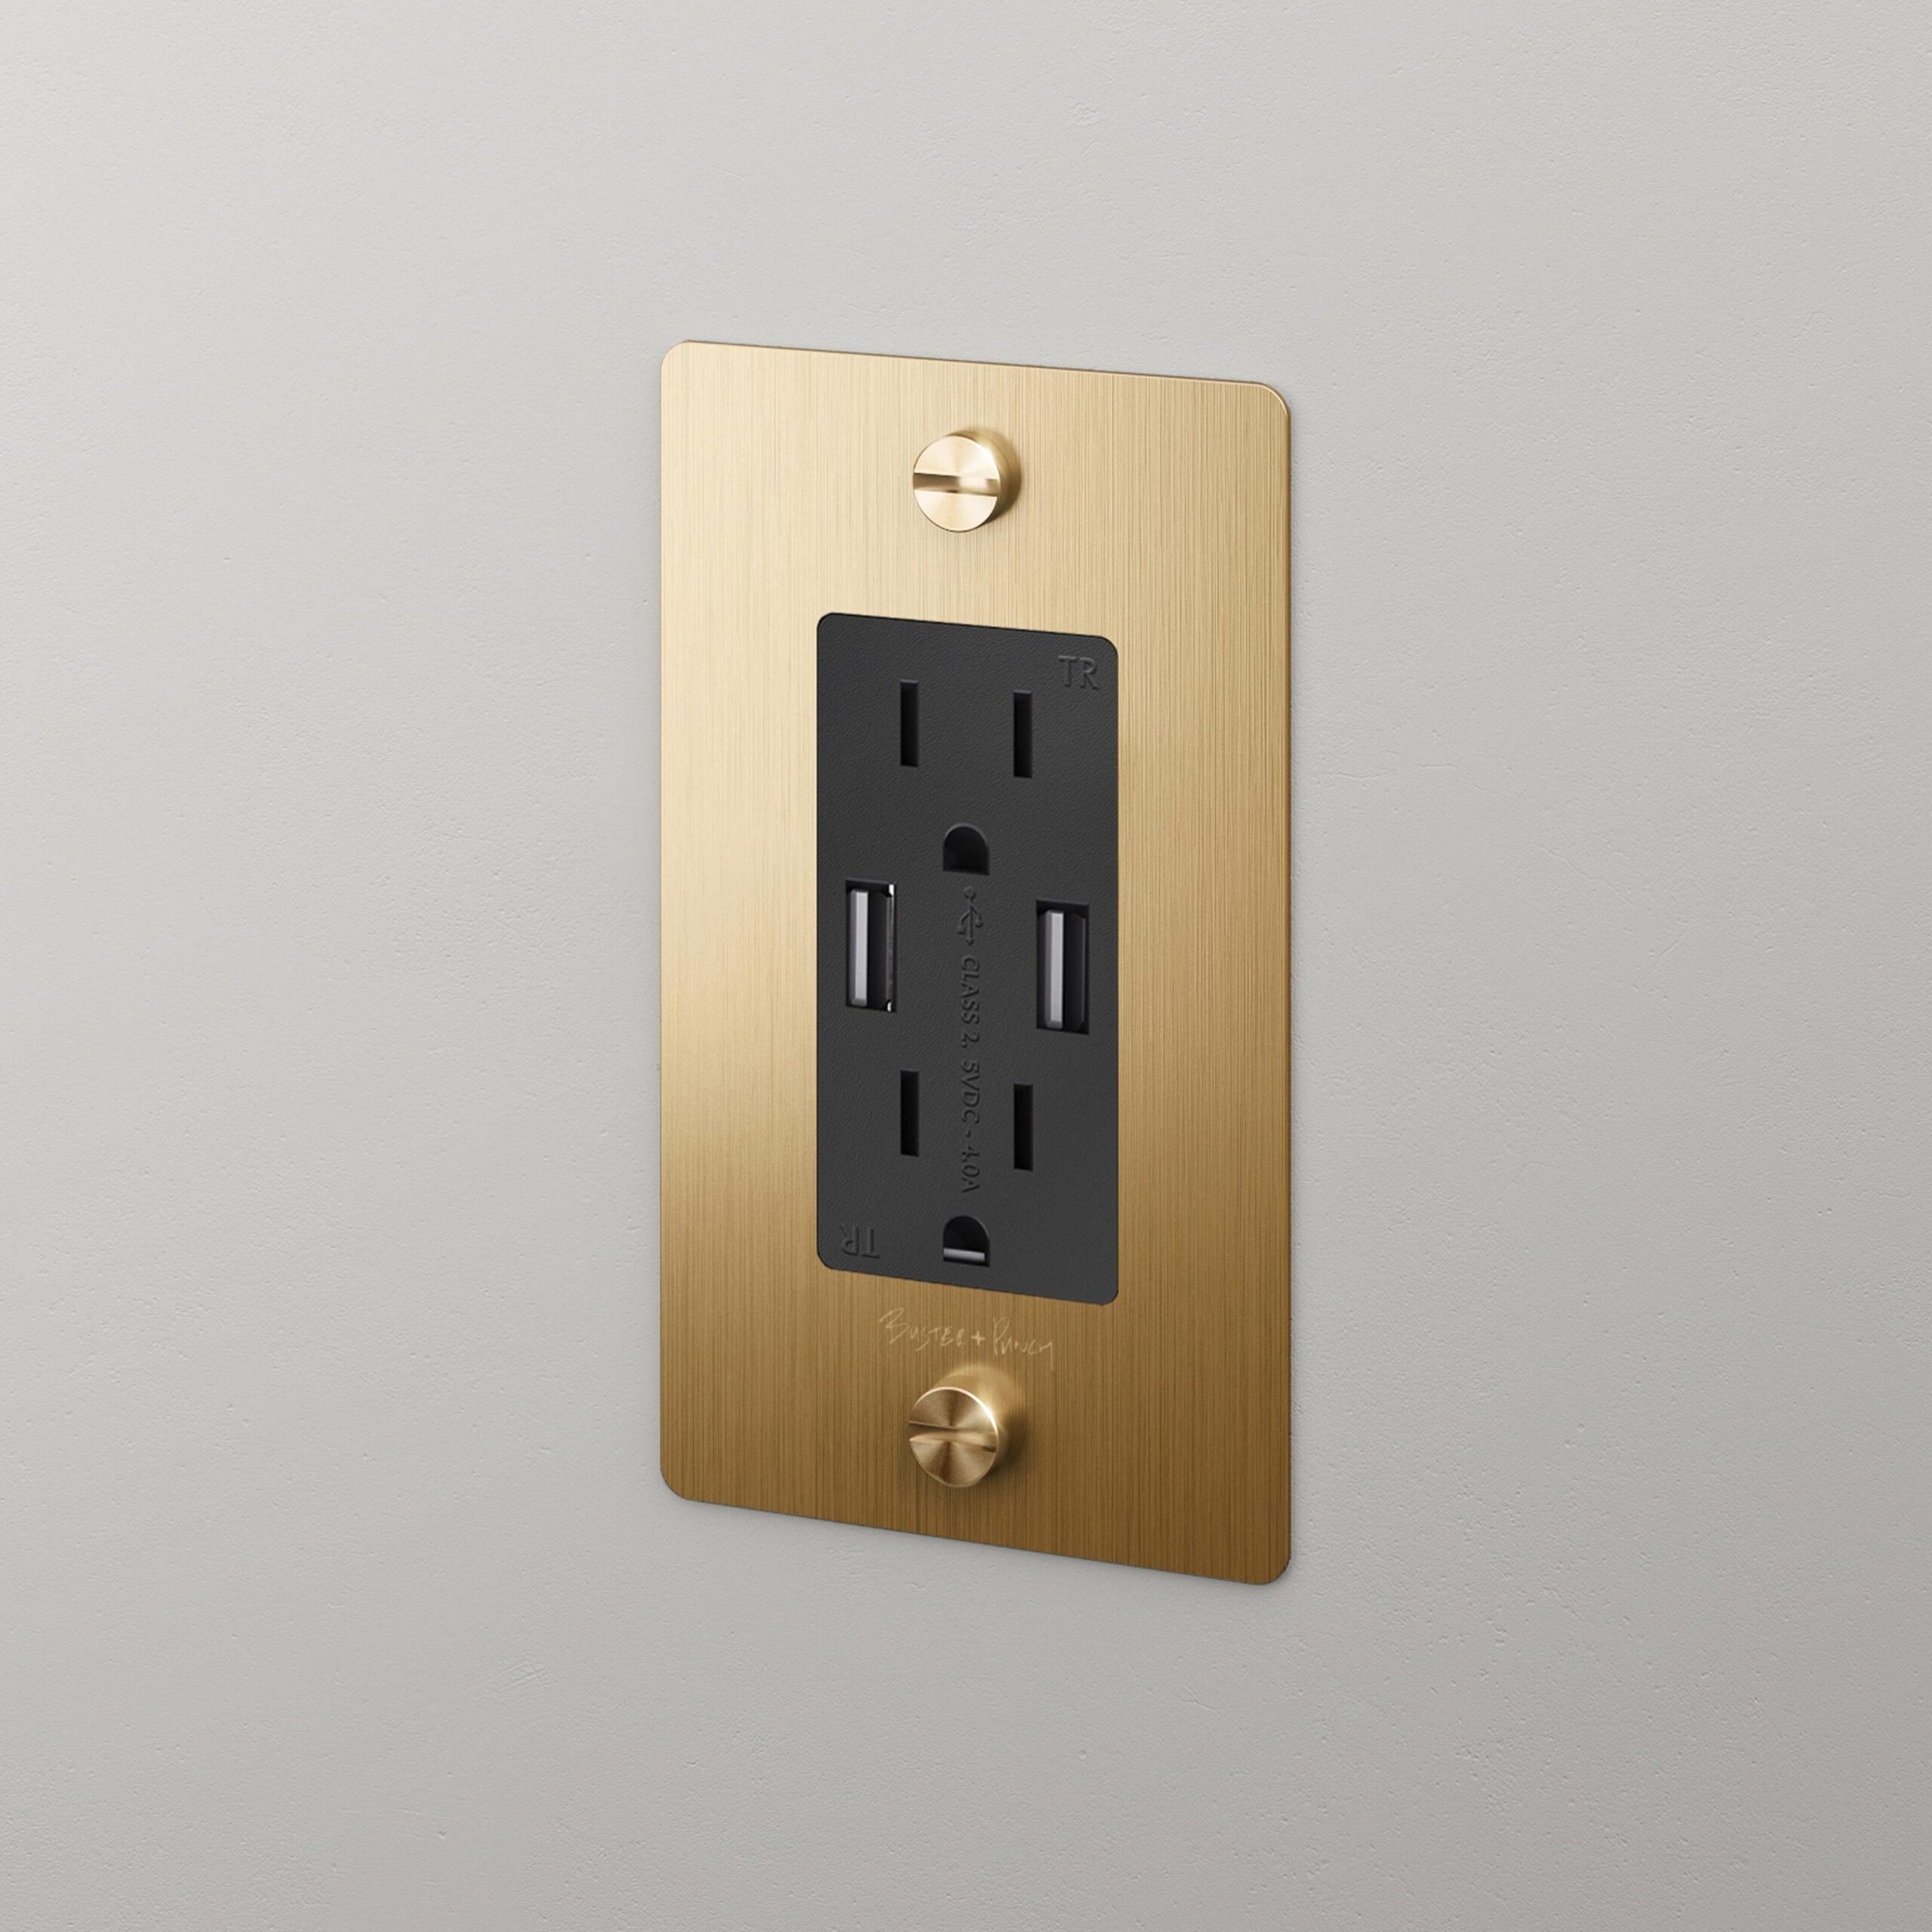 1.-BusterPunch_US_1G_Duplex_Outlet_Brass_Side-scaled.jpg